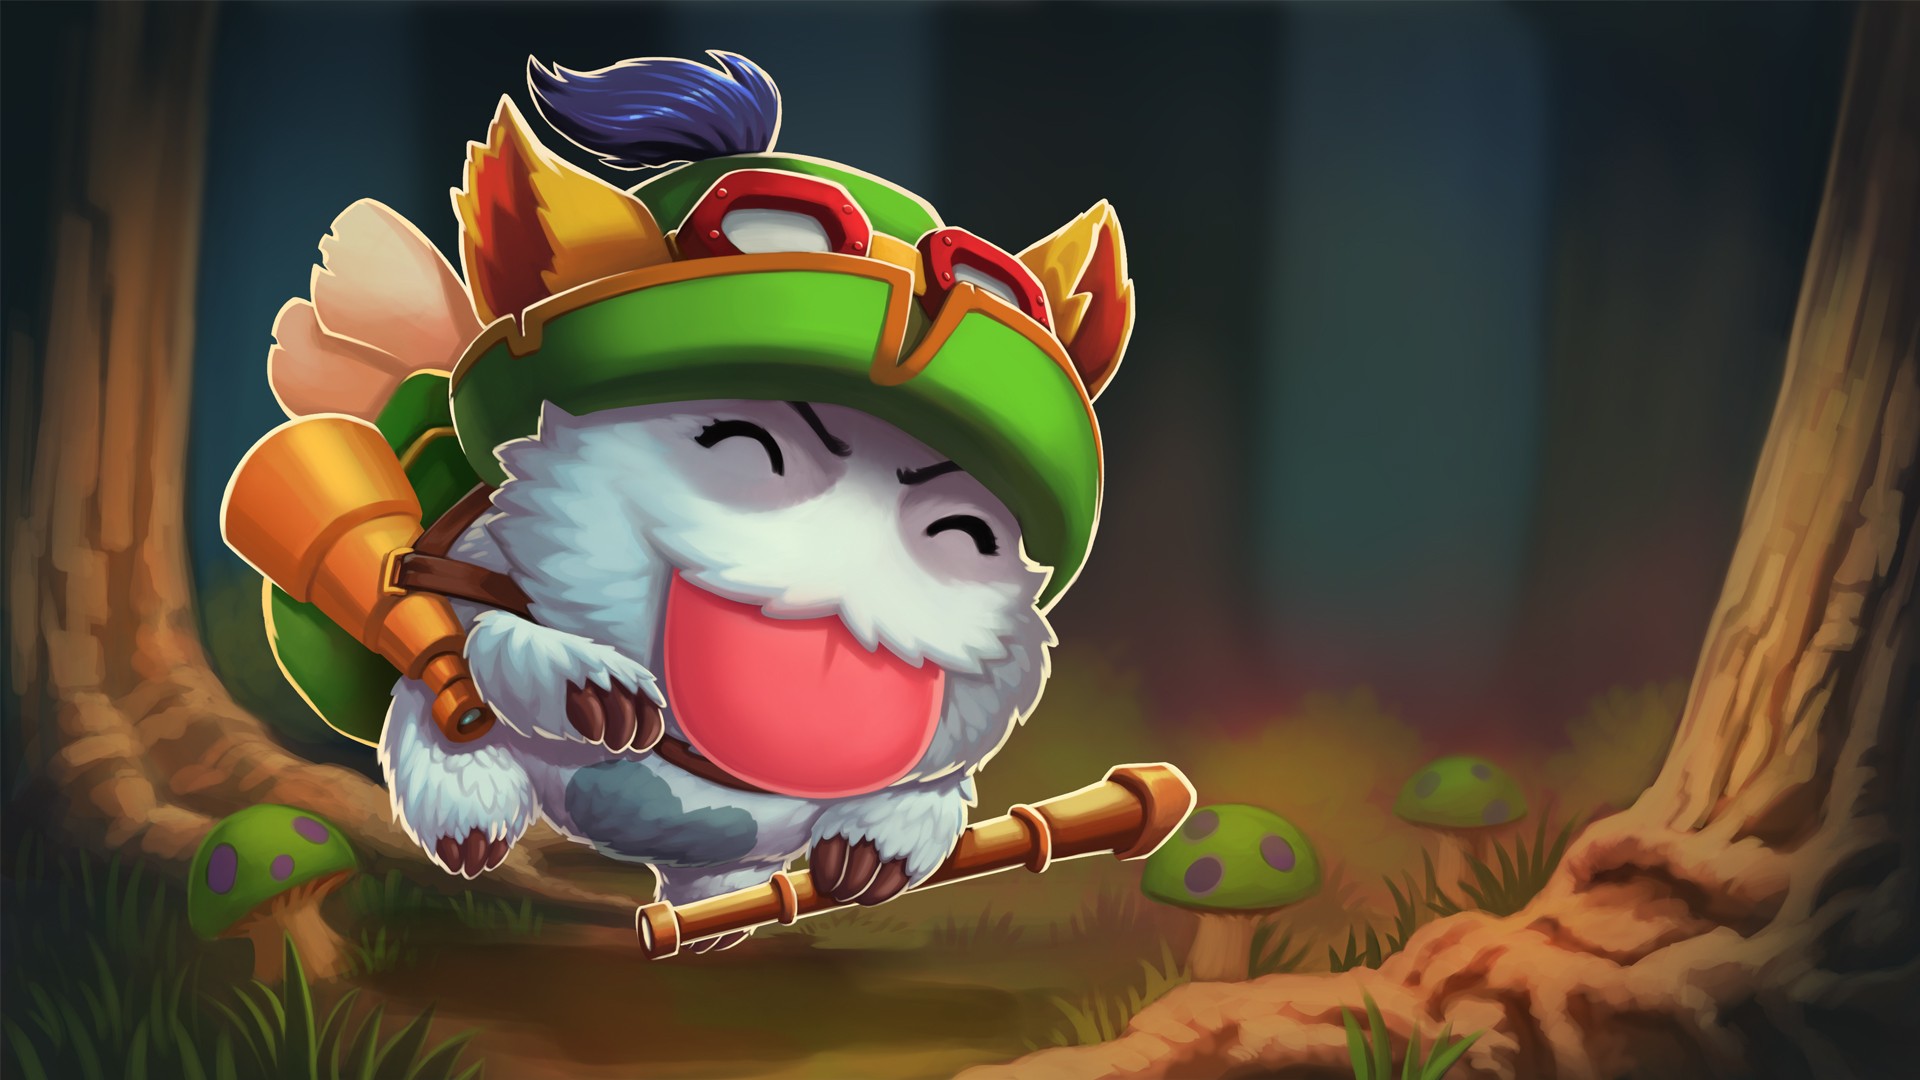 General 1920x1080 League of Legends video games Poro (League of Legends) Teemo (League of Legends) video game art PC gaming video game characters